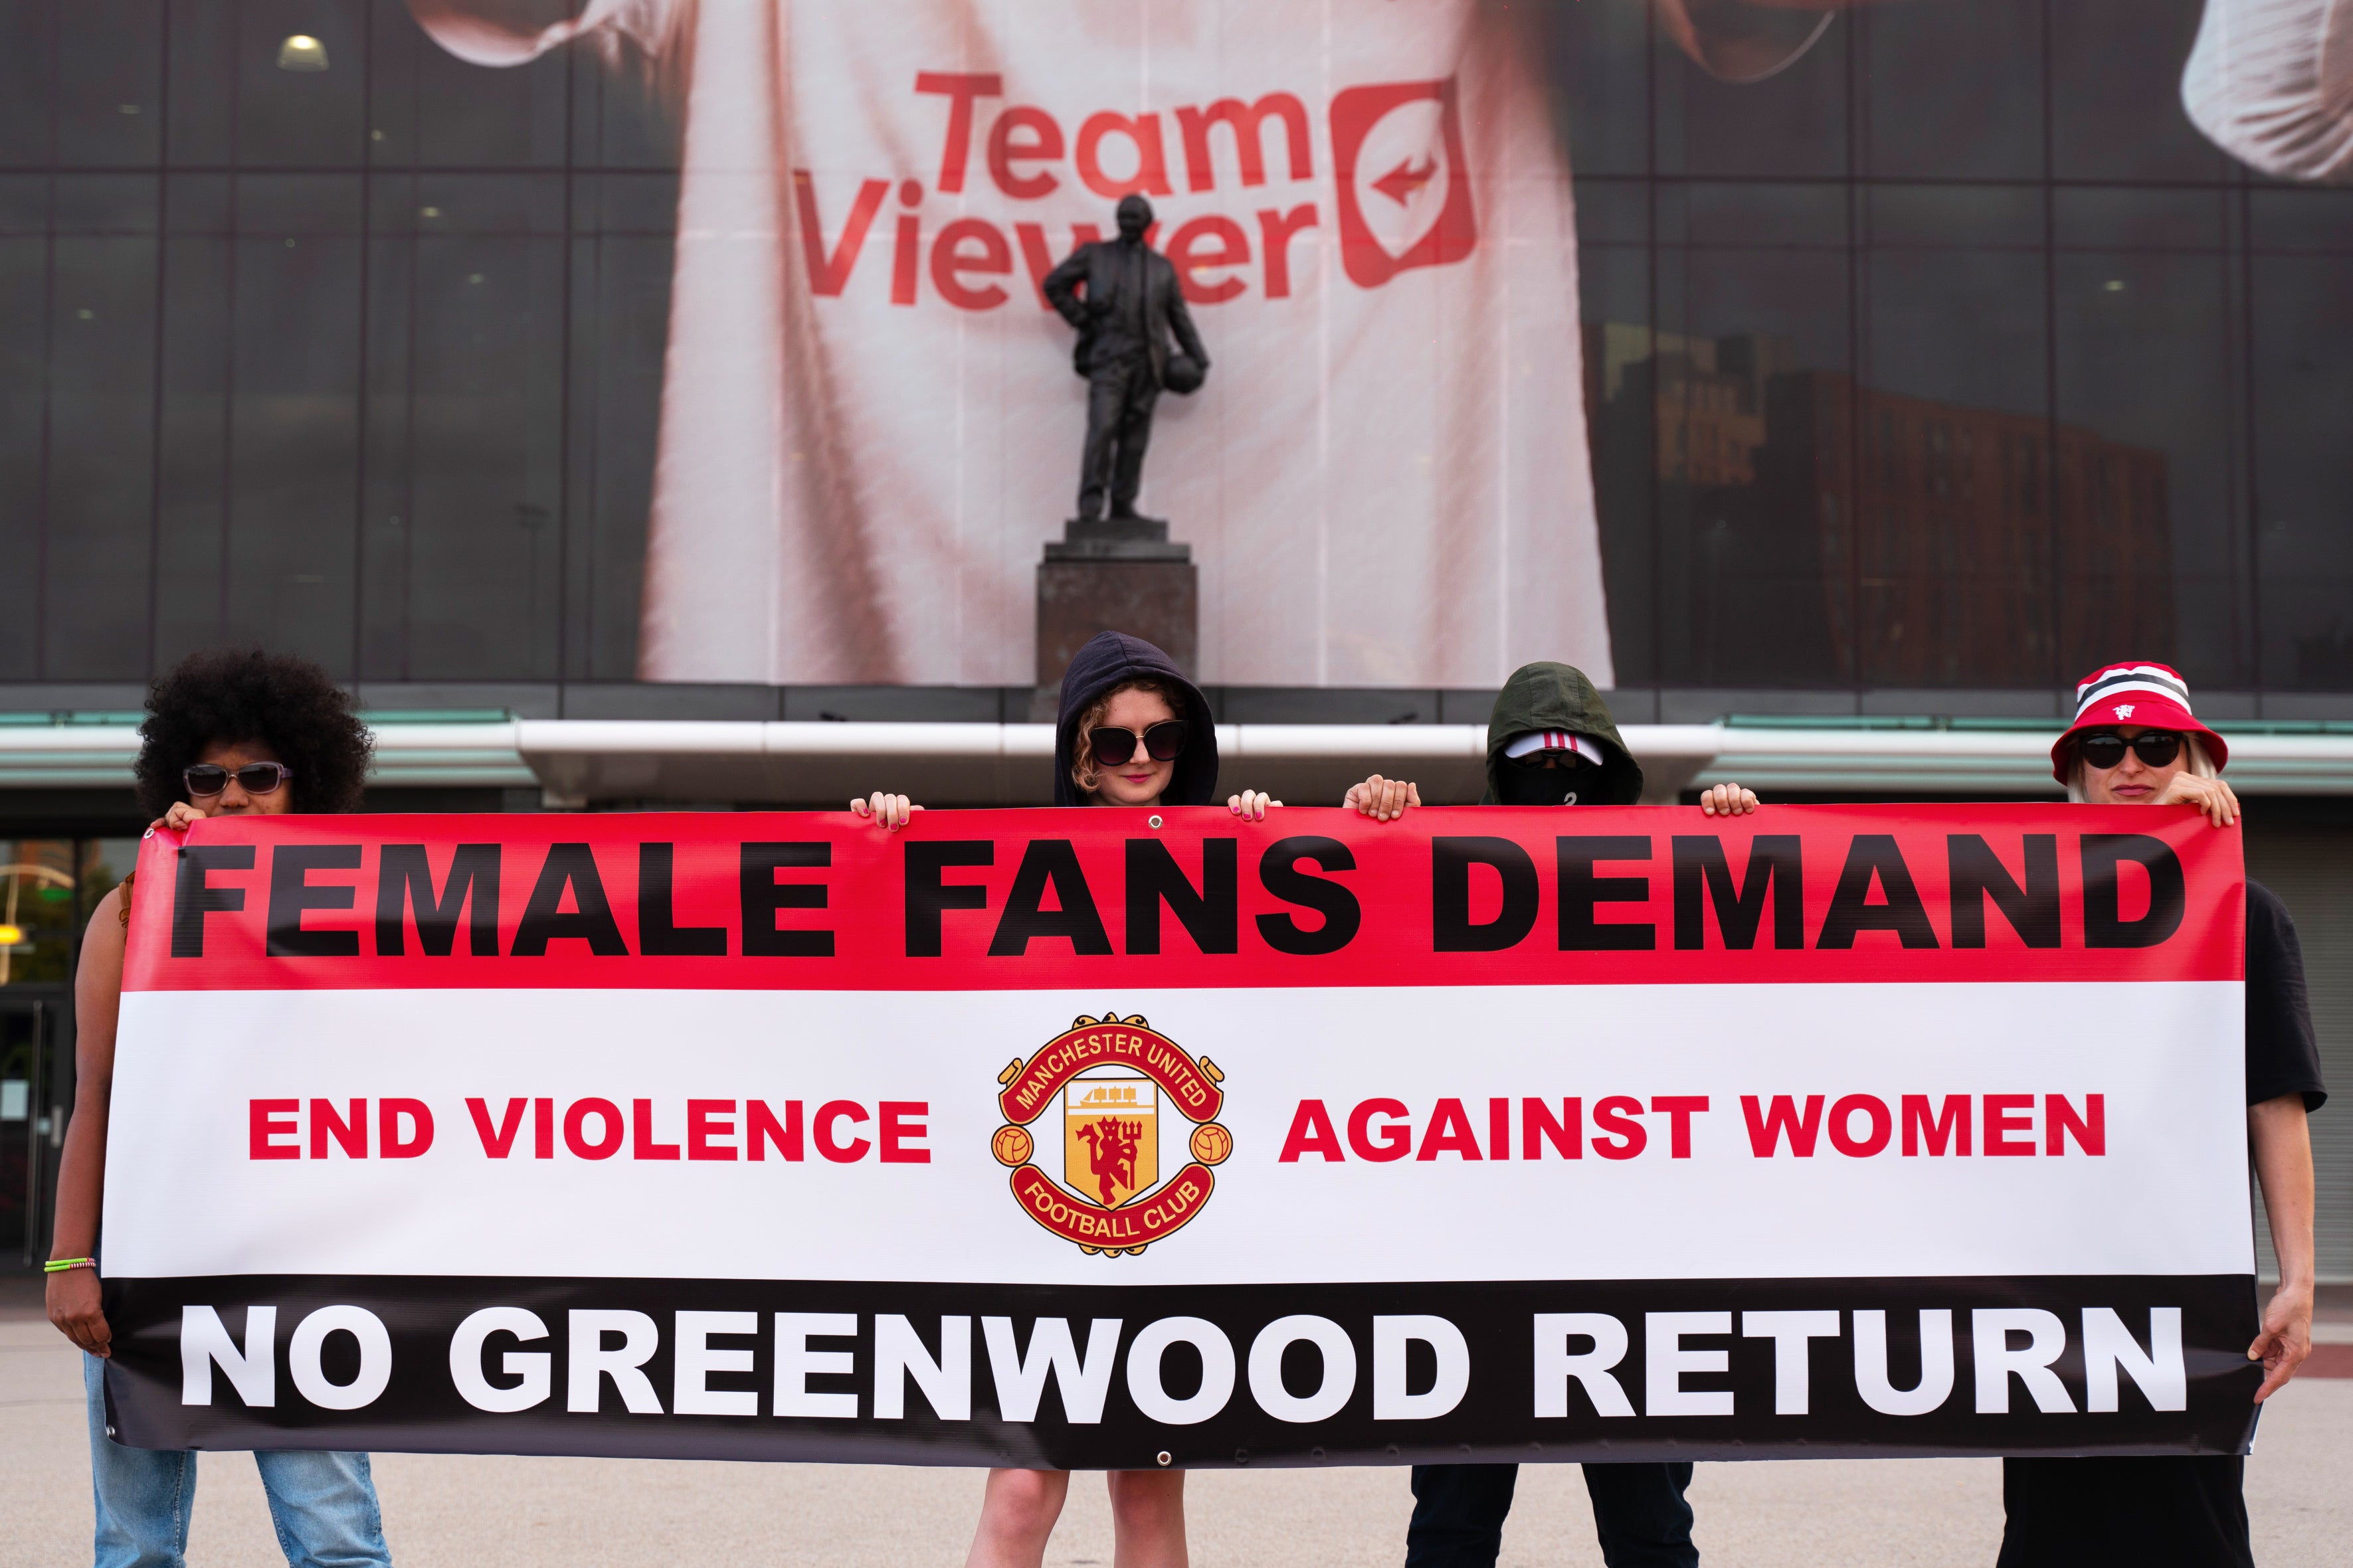 United fans protested against Greenwood’s return